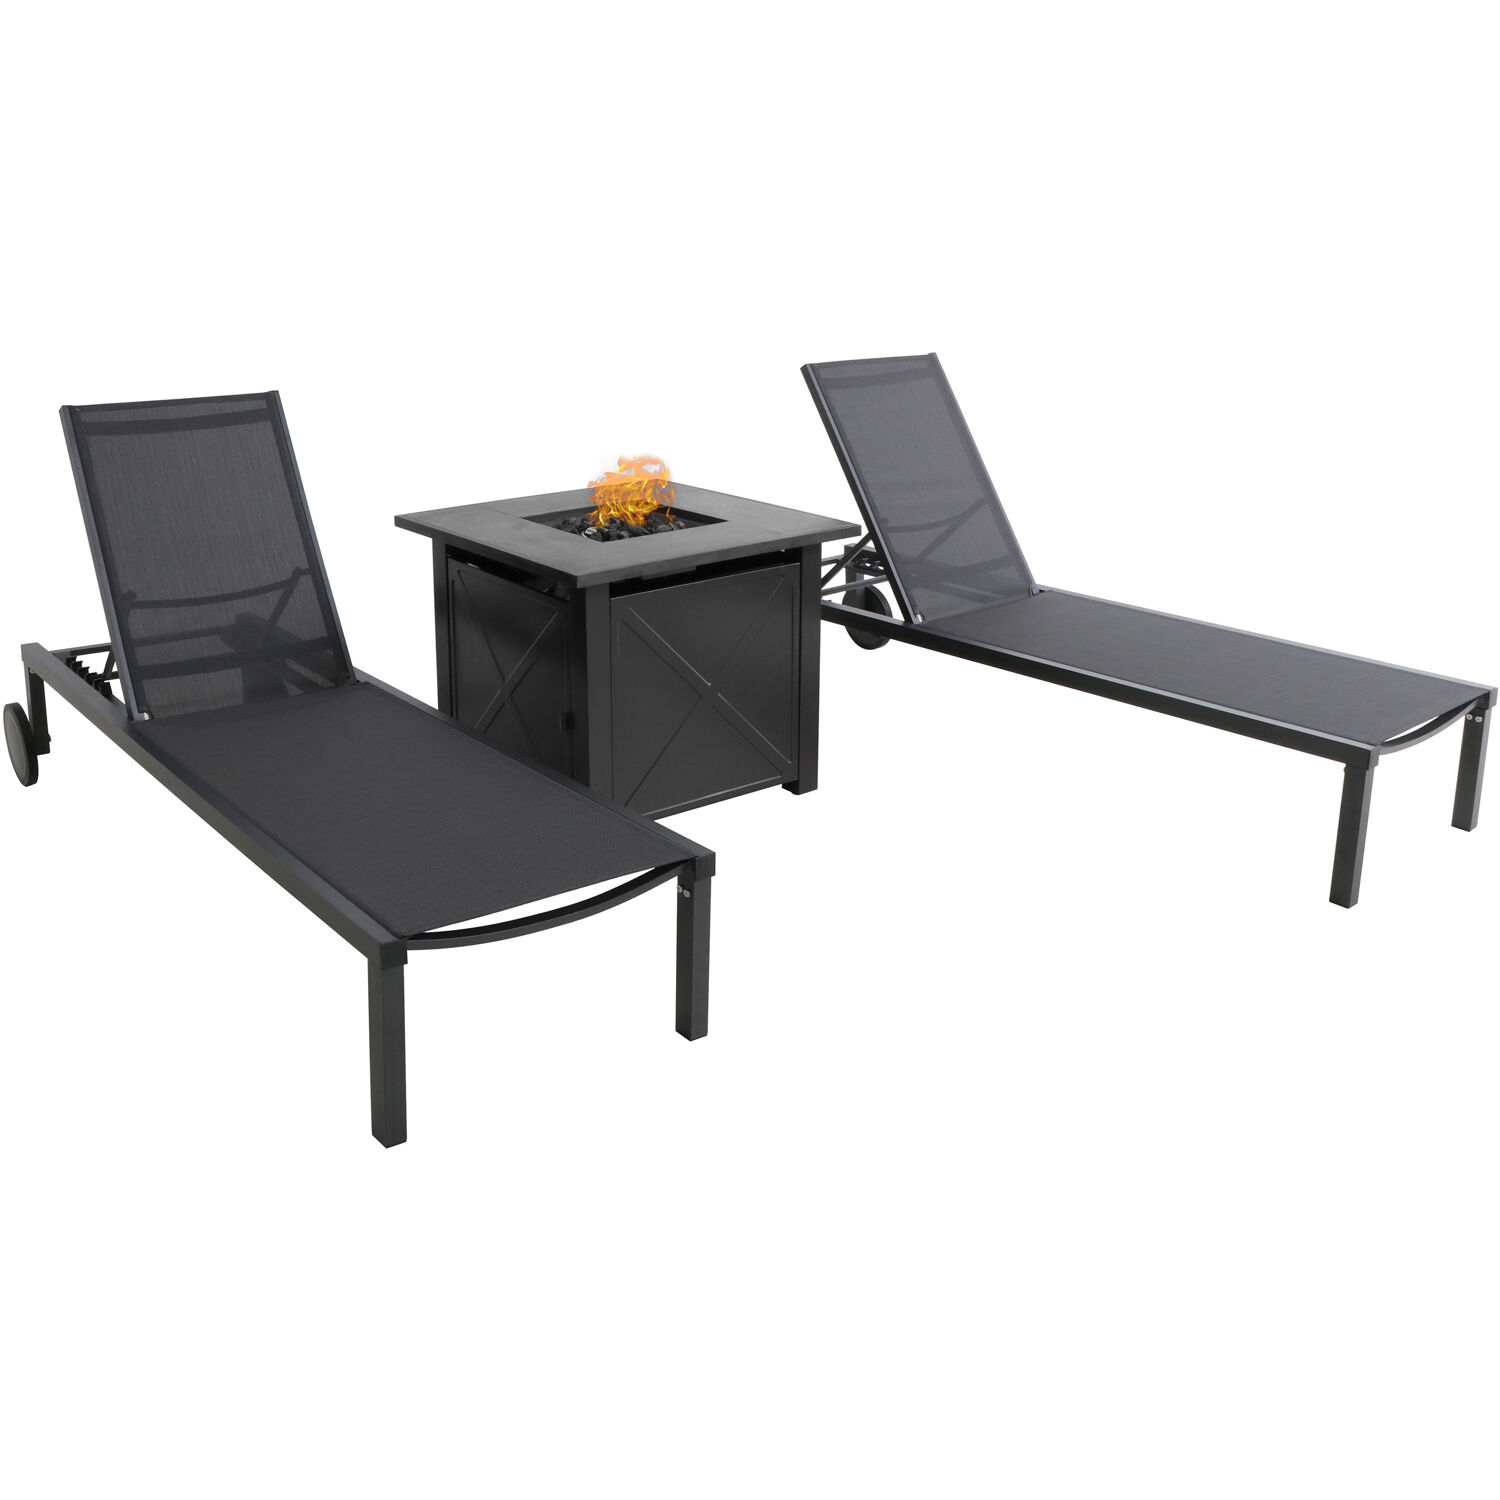 Hanover Windham 3 Pcs PVC Sling Chaise Lounge Propane Fire Pit Set, Gray - image 1 of 20